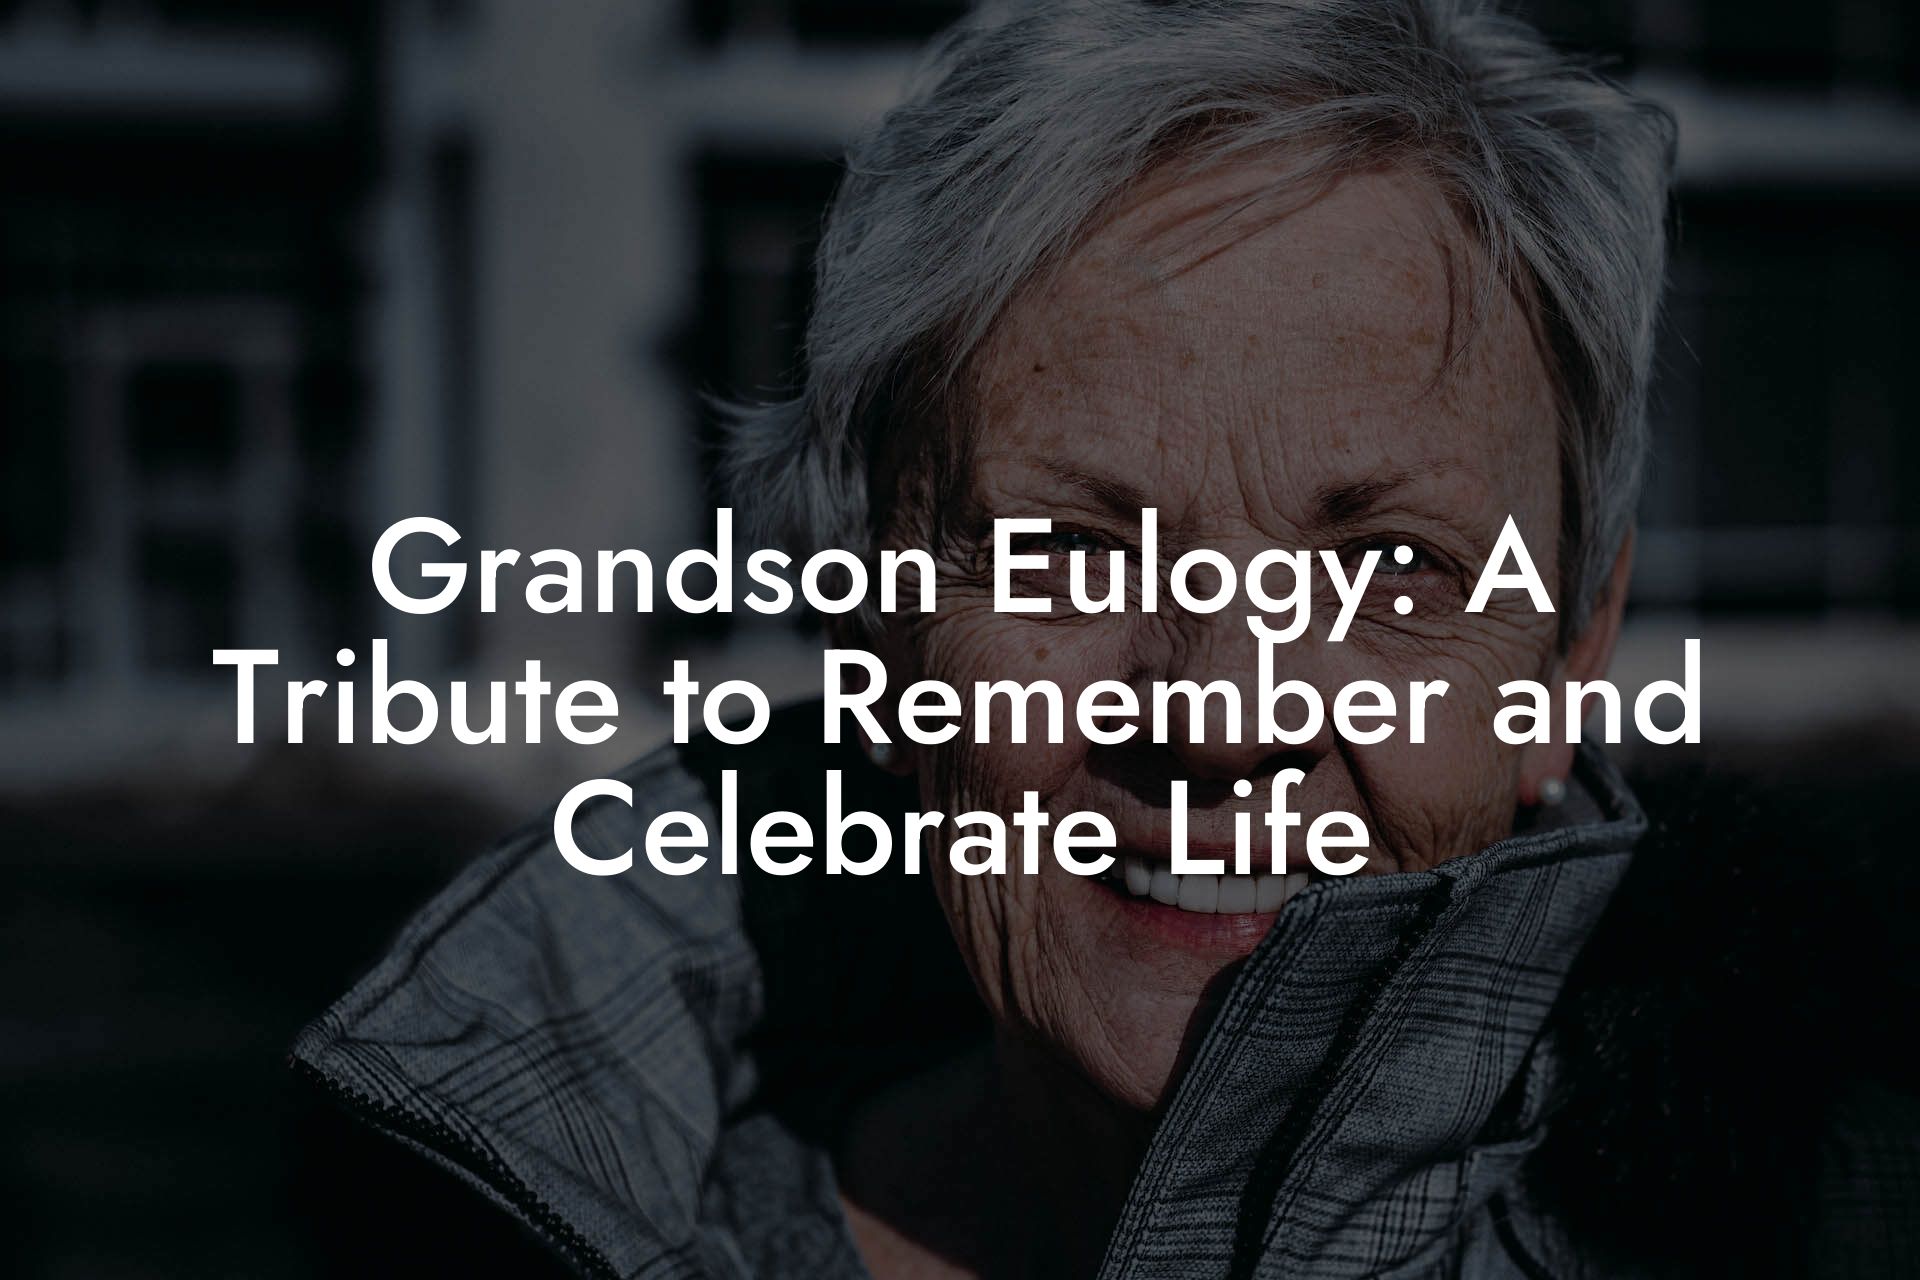 Grandson Eulogy: A Tribute to Remember and Celebrate Life